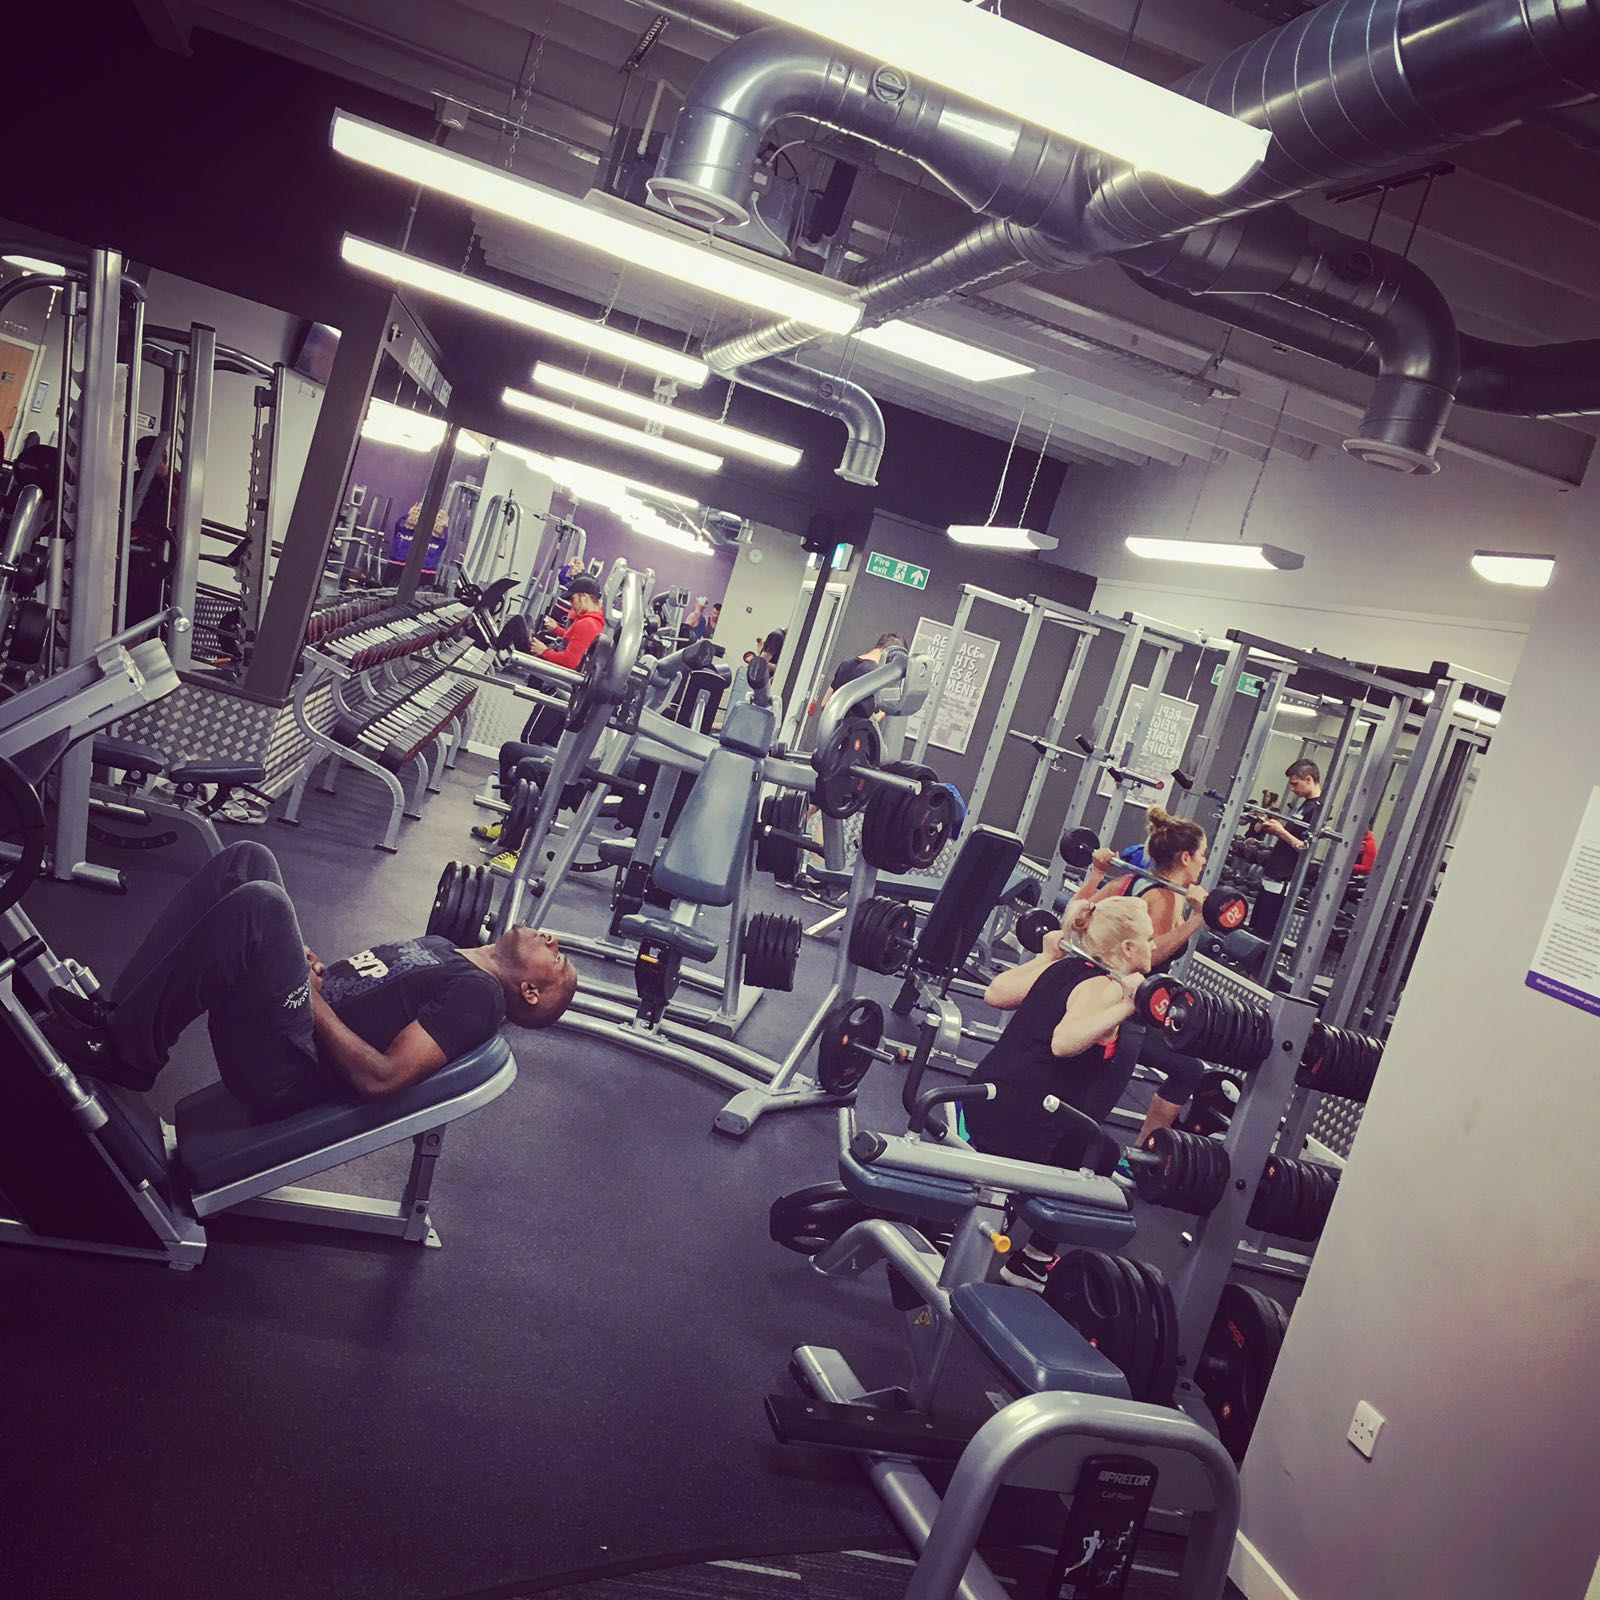 30 Minute How Much Does It Cost To Buy An Anytime Fitness Gym with Comfort Workout Clothes